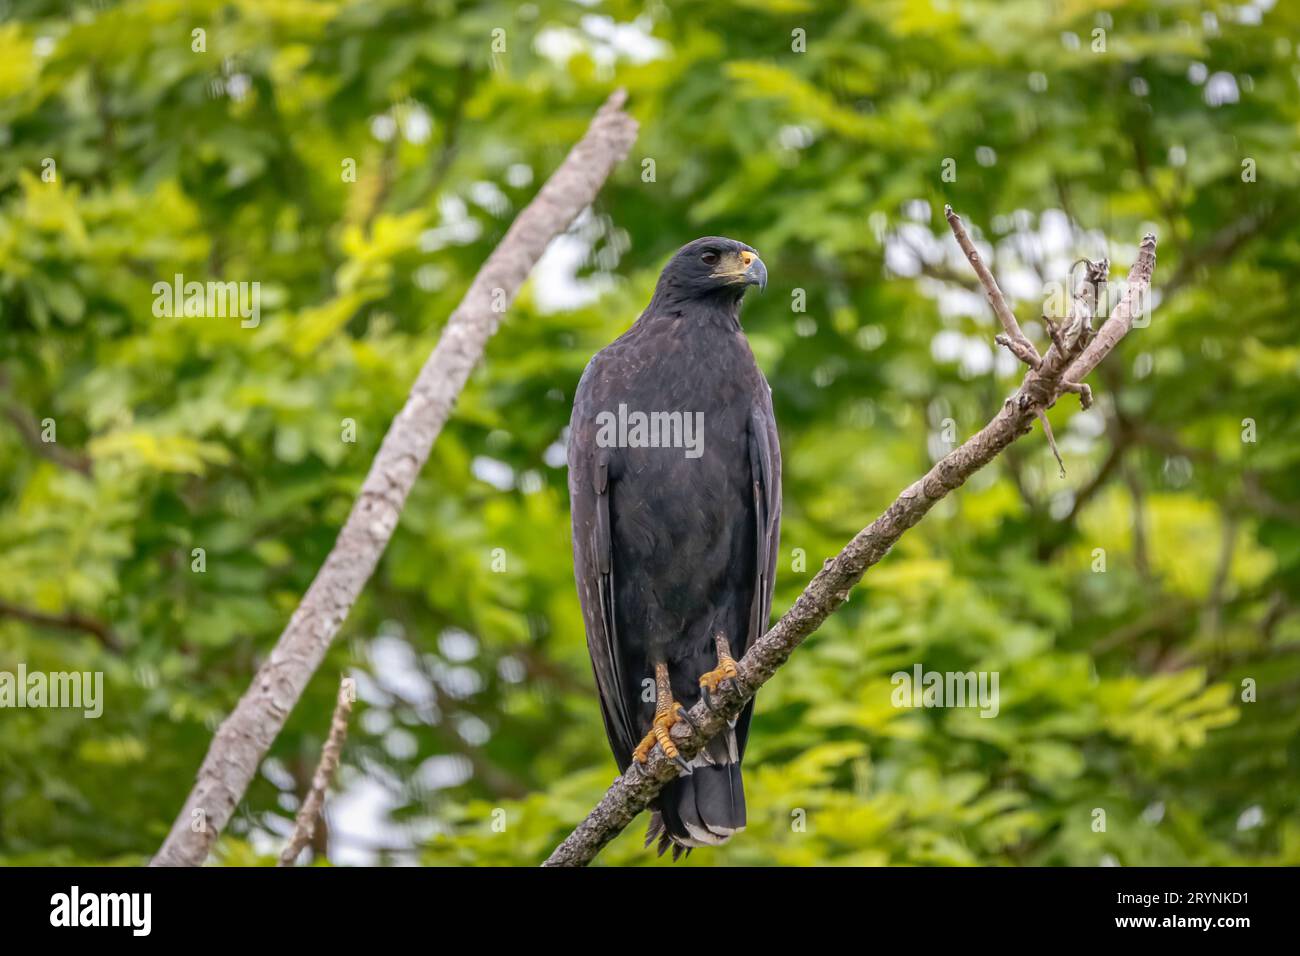 Close-up of a Great black hawk perched on a branch against green background, Pantanal Wetlands, Mato Stock Photo